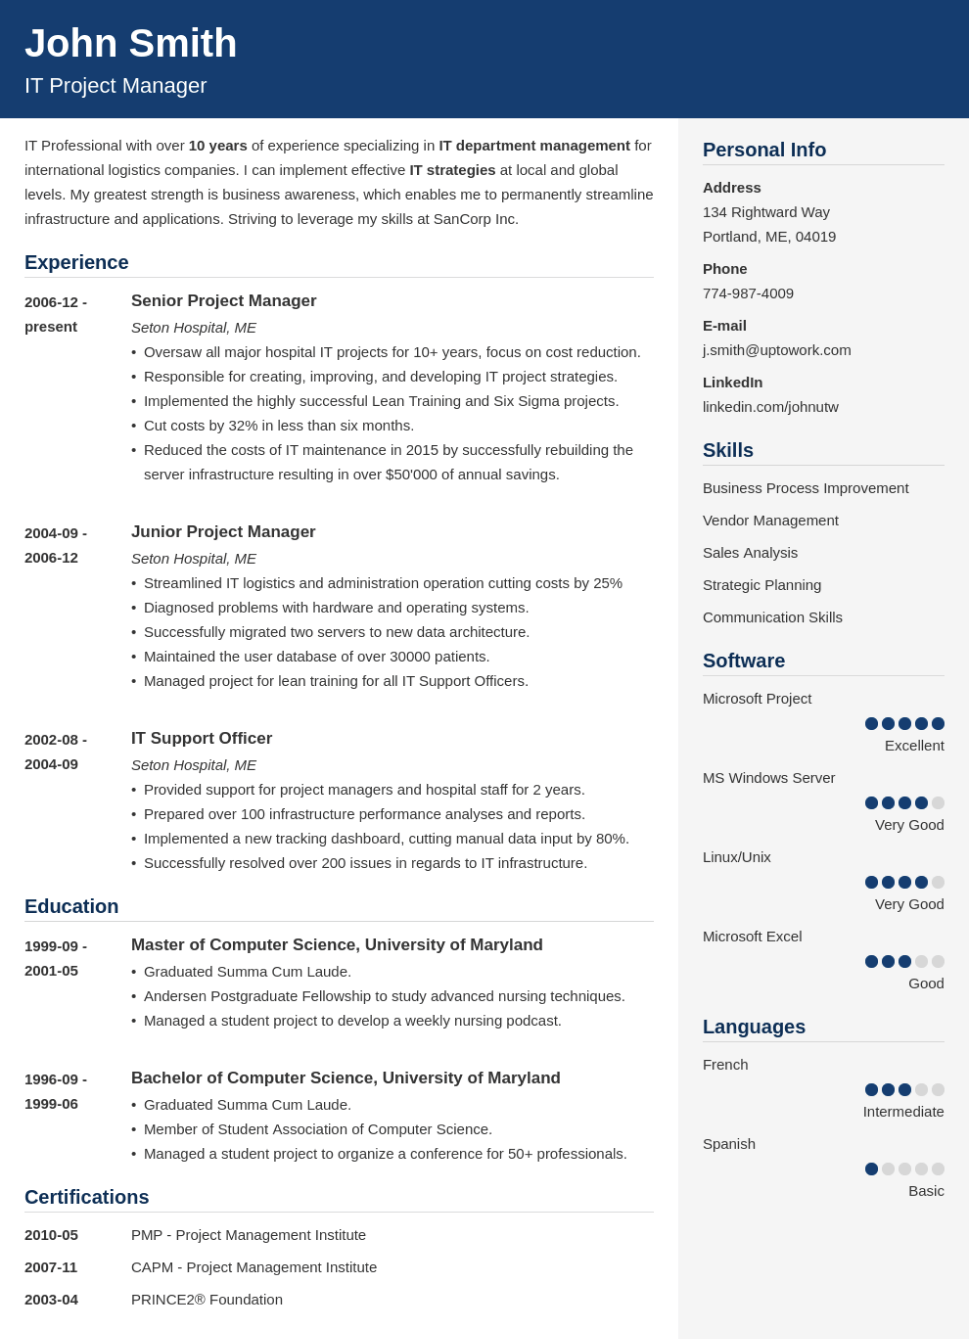 Example of professional resume